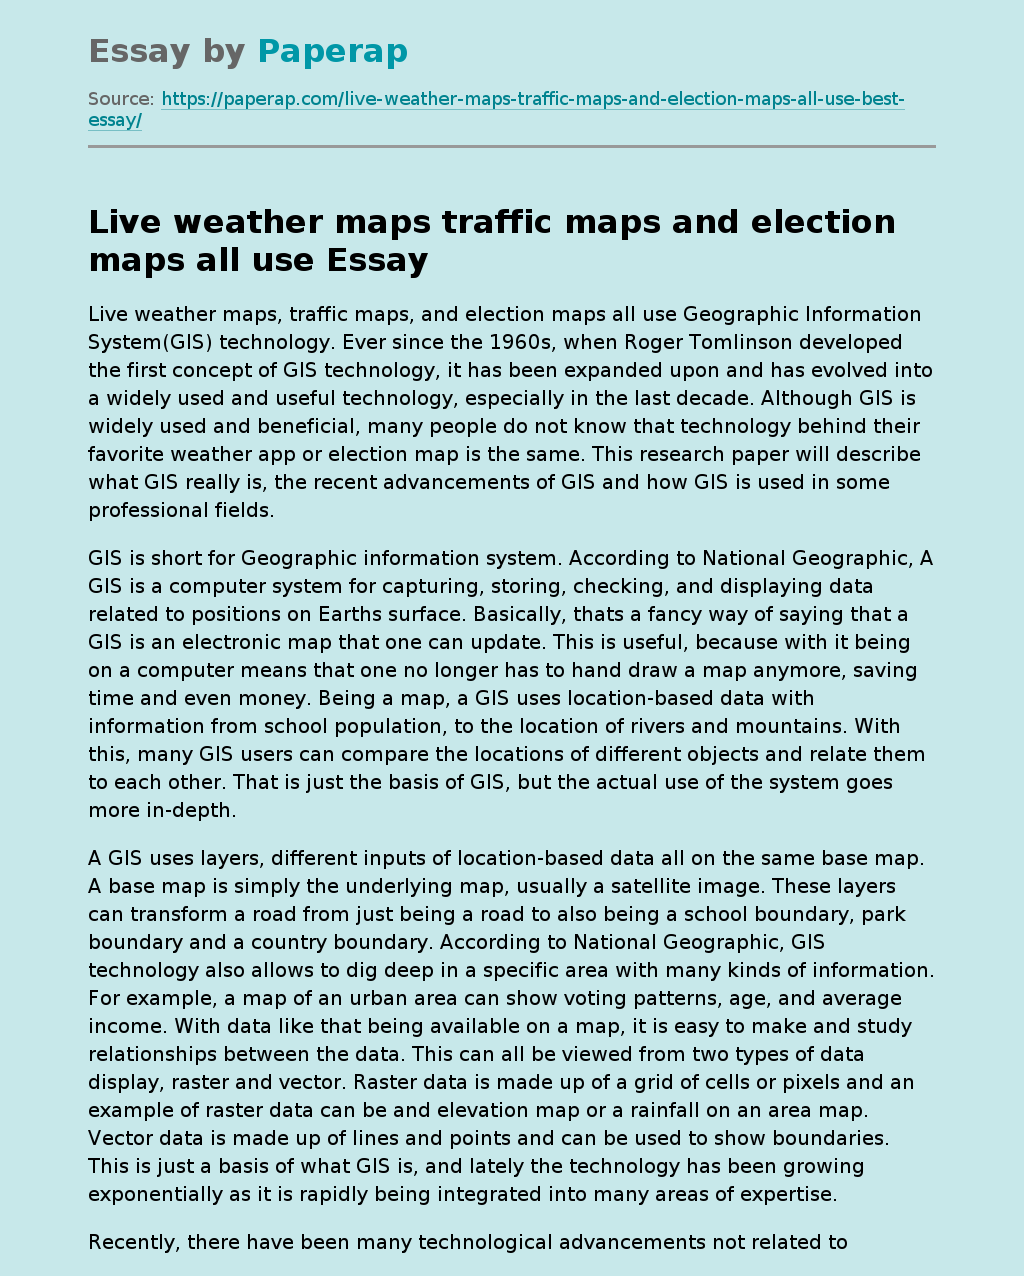 Live weather maps traffic maps and election maps all use